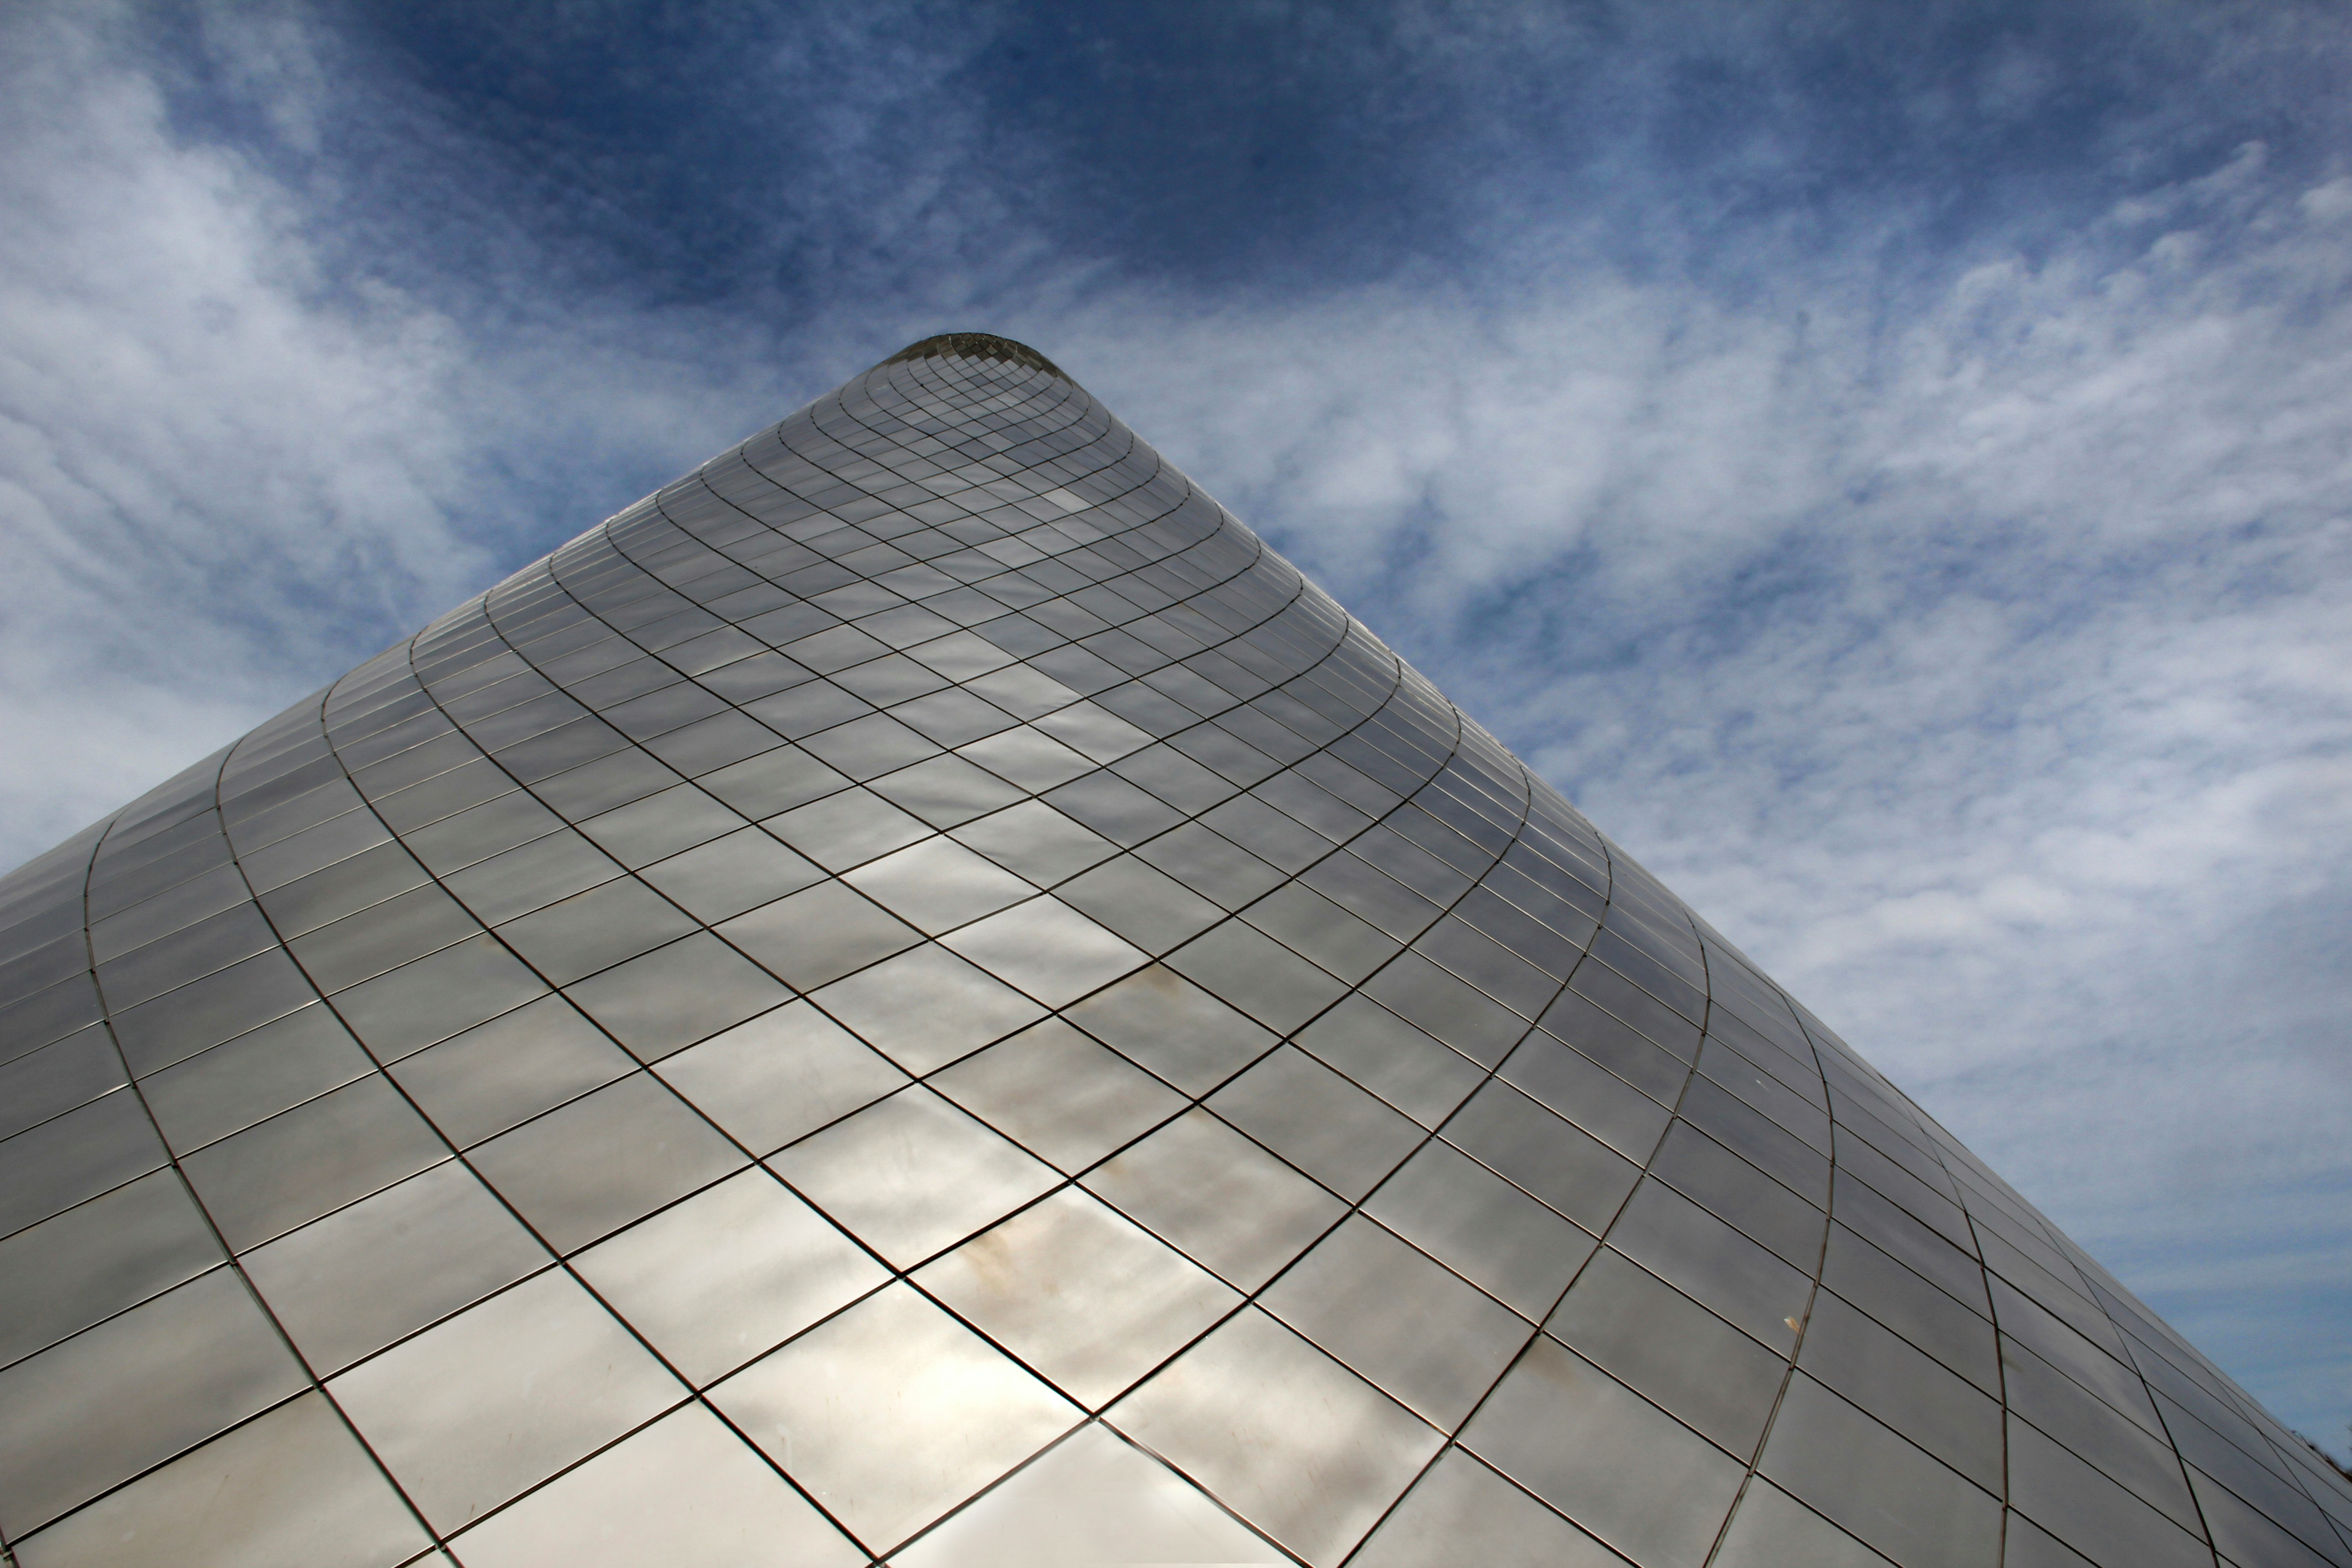 This is a replica of the space cone located near the front entrance to the Museum of Glass in downtown Tacoma, Washington.  It opened in 2002 and was erected on a Superfund site.  The museum features live glassmaking and has been listed in  USA today as a top ten tourist destination in Washington State.